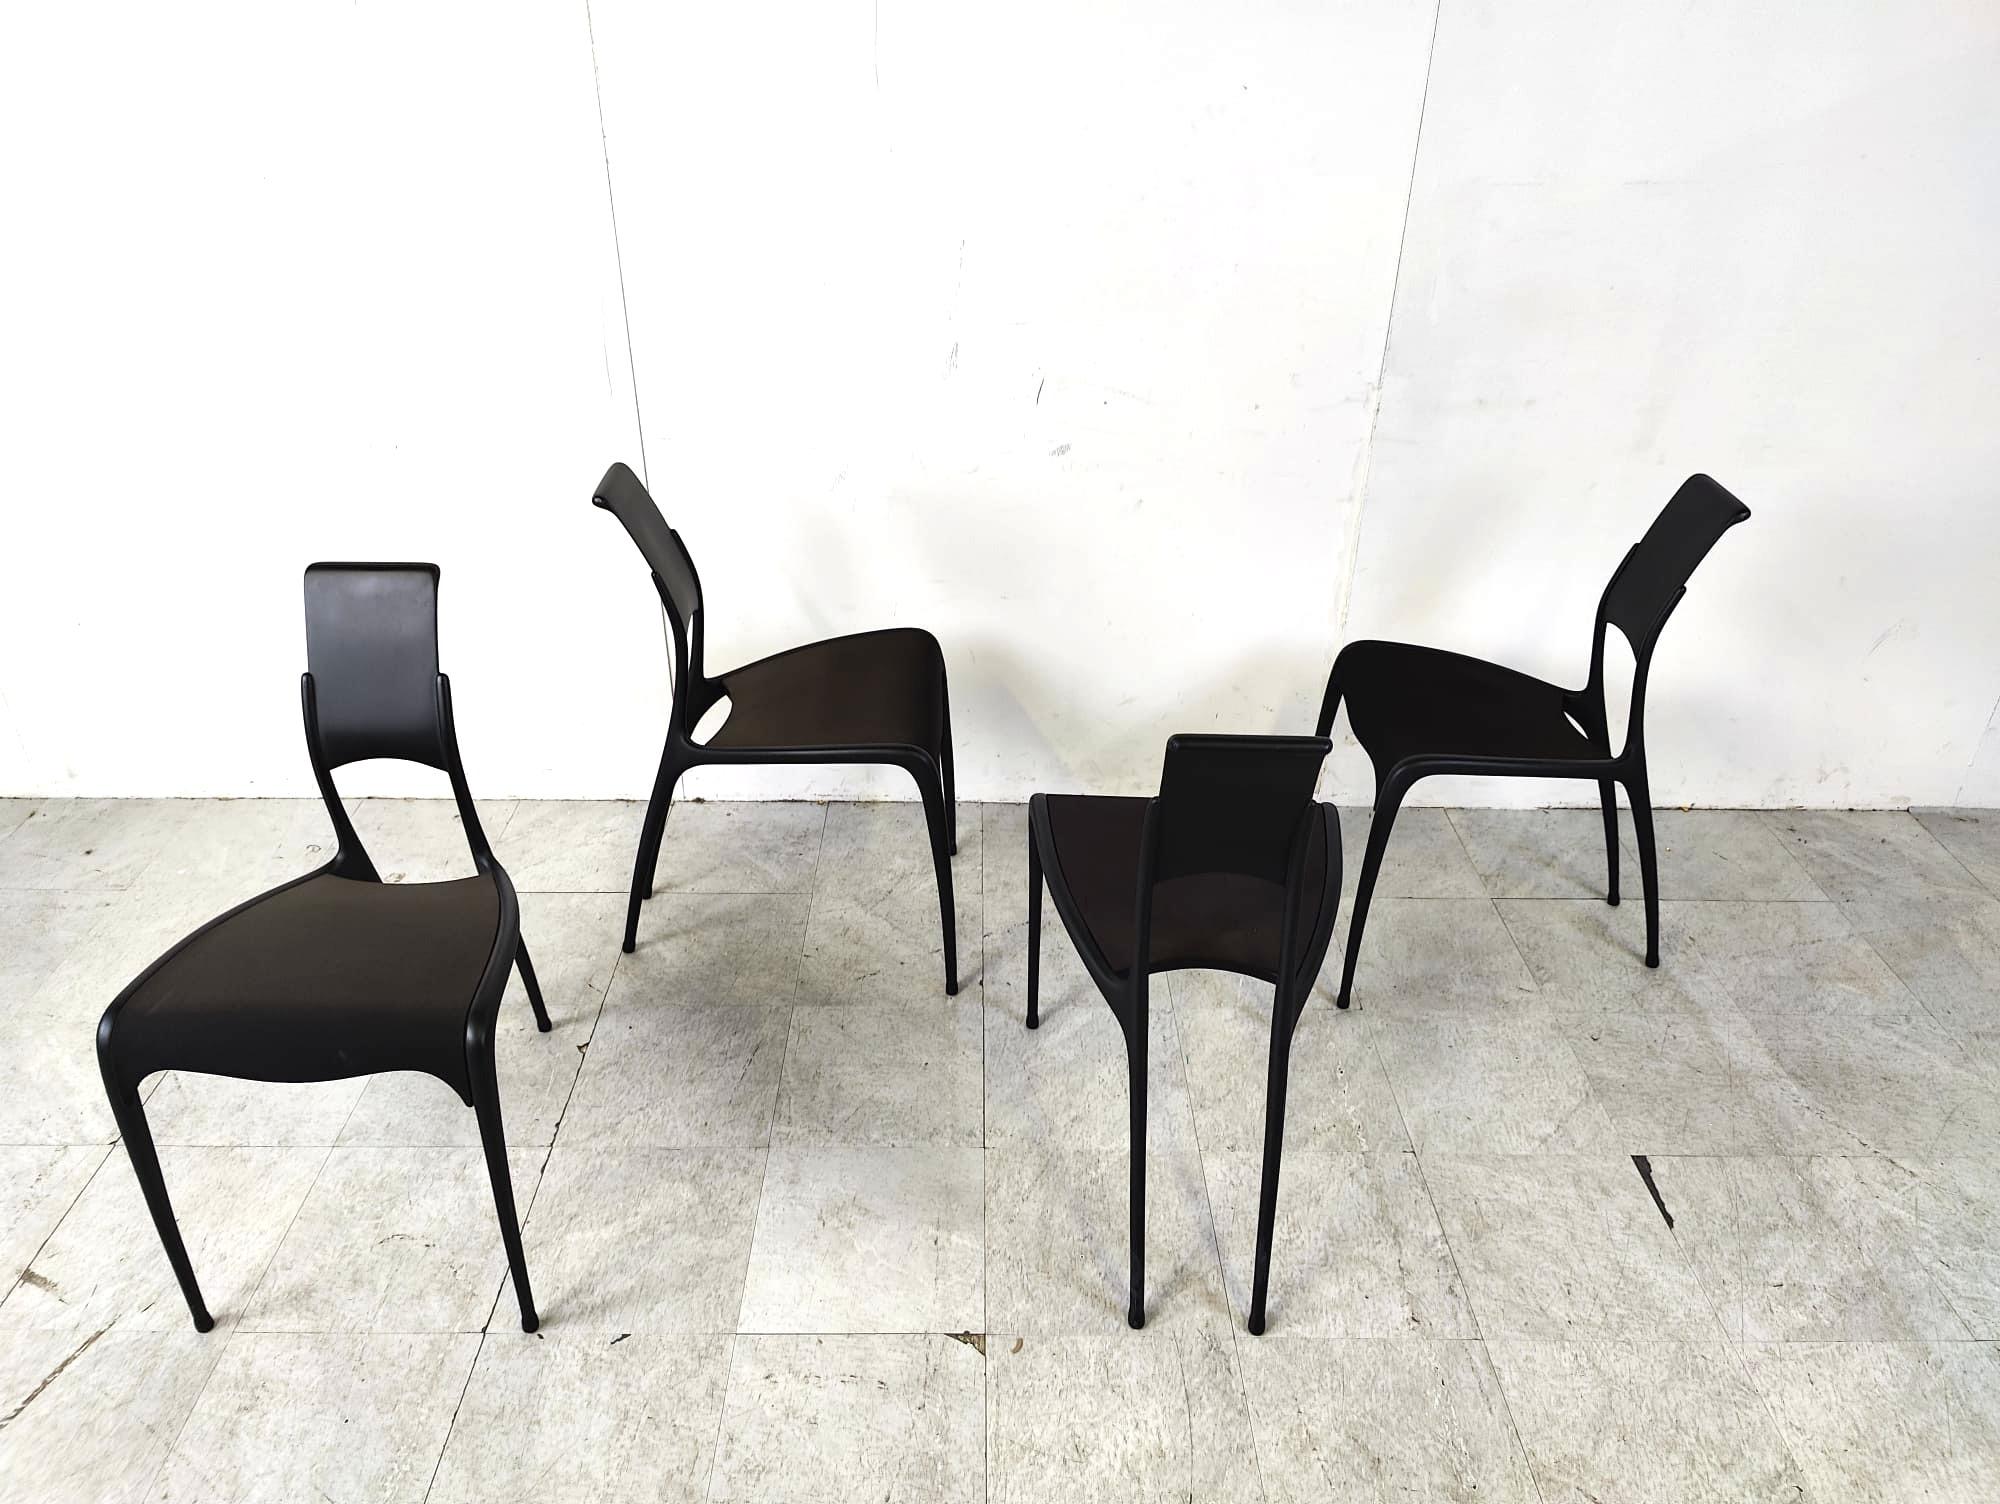 Ultra rare set of full carbon fibre dining chairs, Model C06, designed by Pol Quadens and produced from 1995 to 1997 to a limited 1000 examples.

Each chair has its individual serial number.

Its in fact the lightest chair in the world (back then)